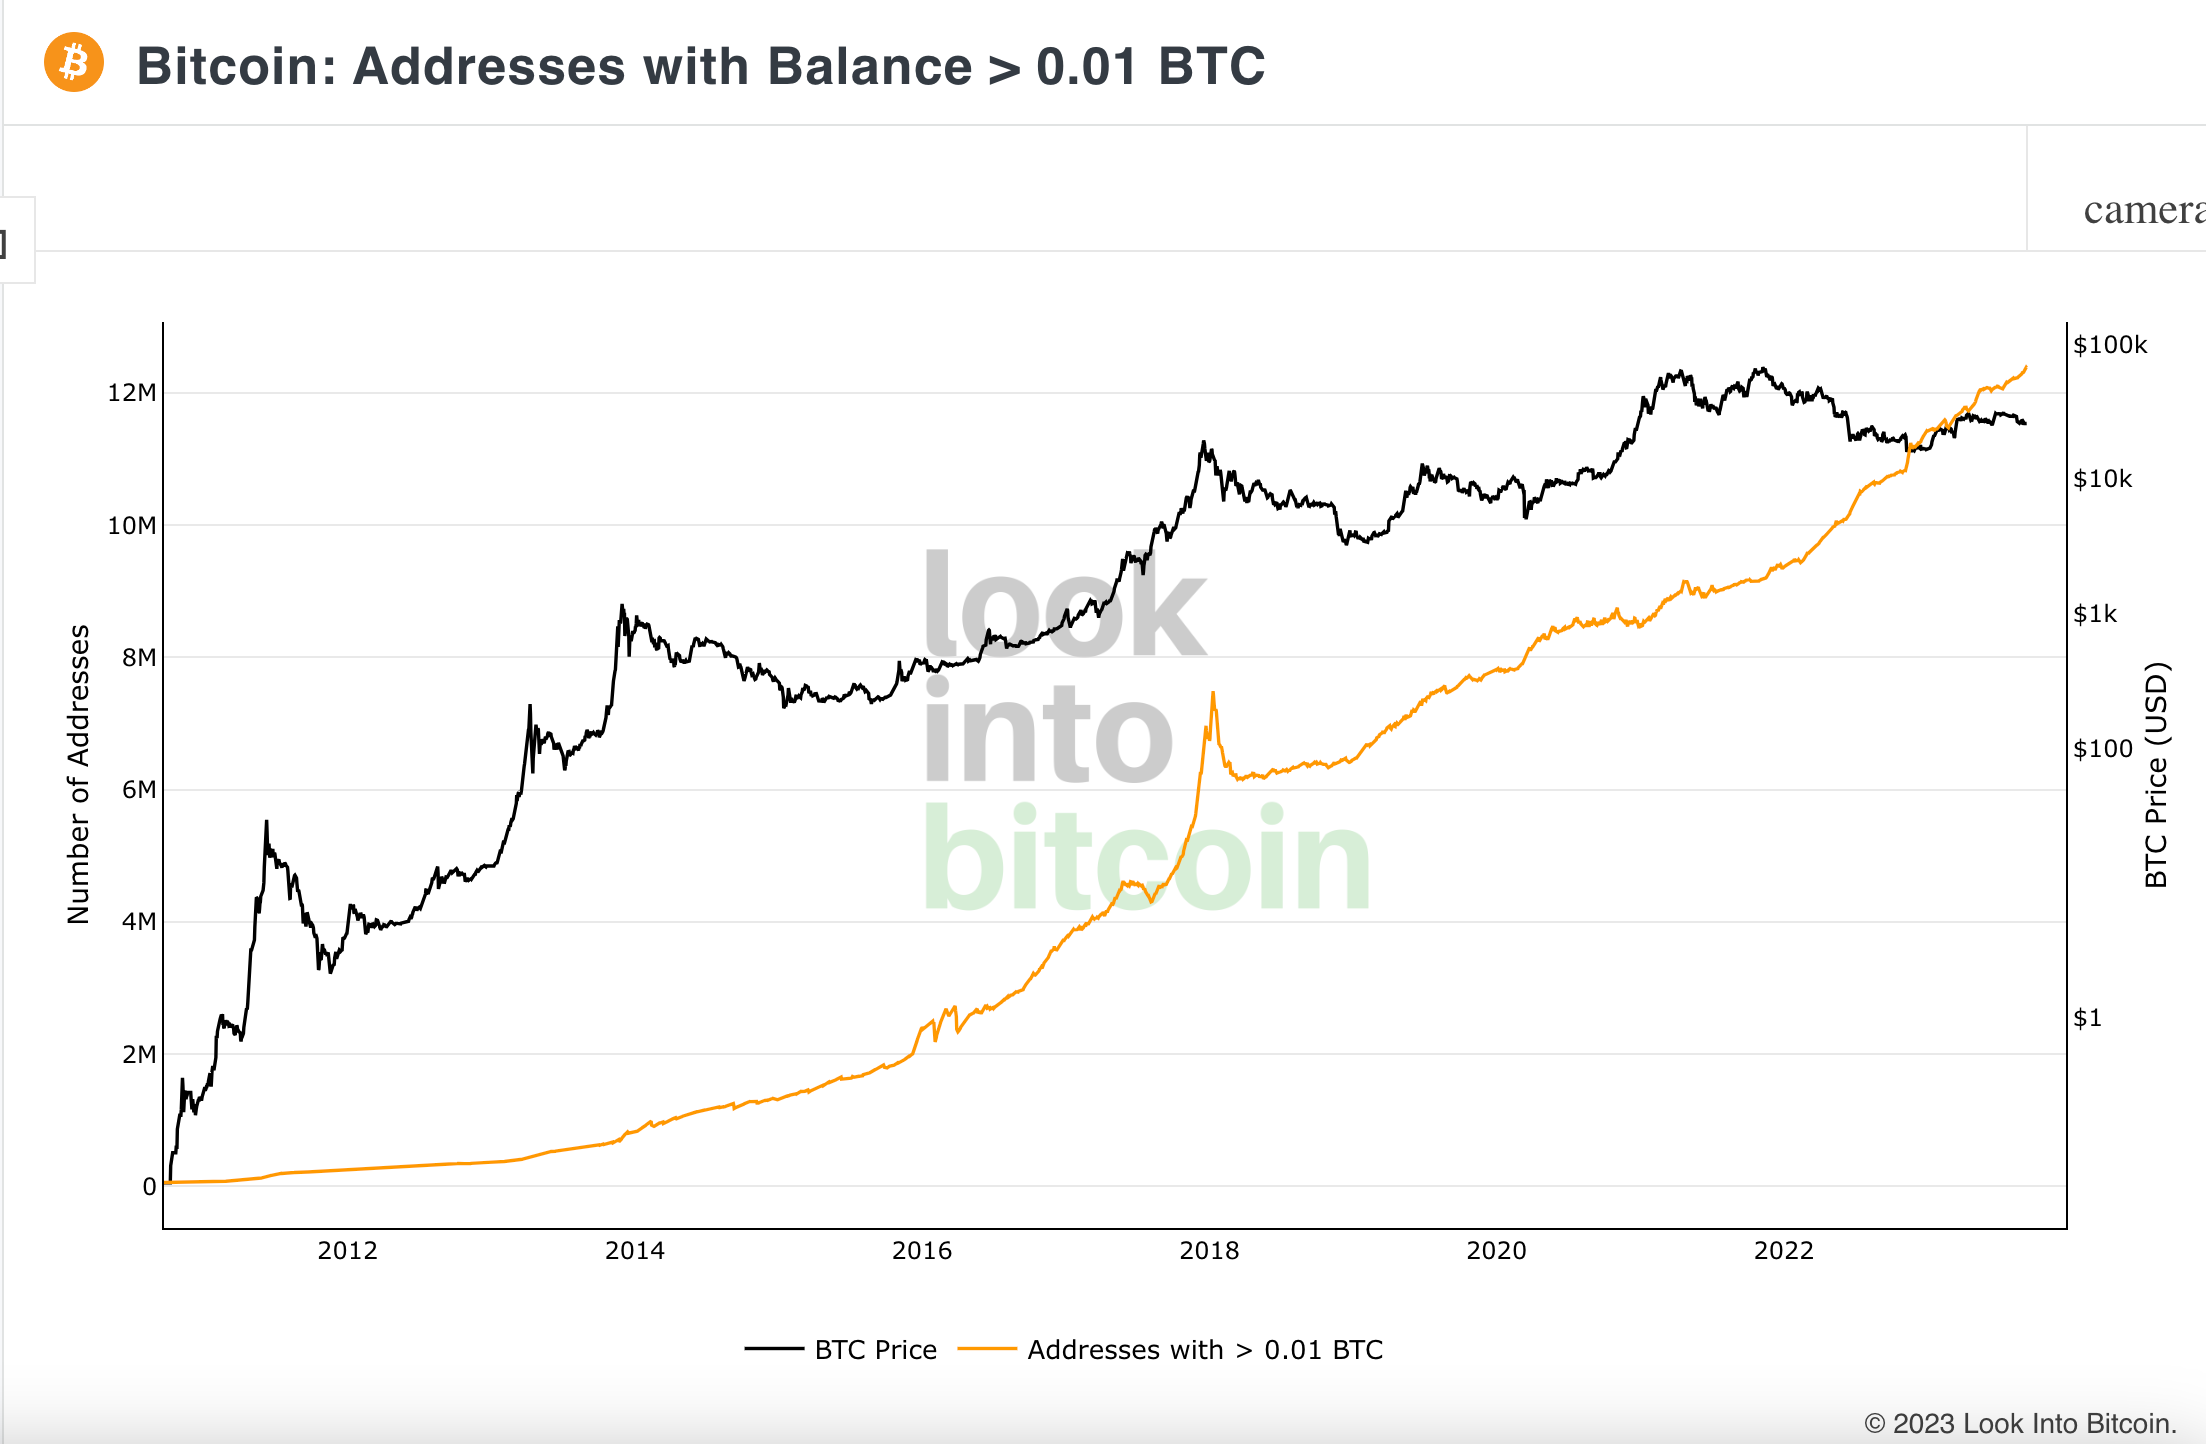 Bitcoin wallet addresses containing a balance exceeding 0.01 BTC compared with its price, sourced from Look Into Bitcoin